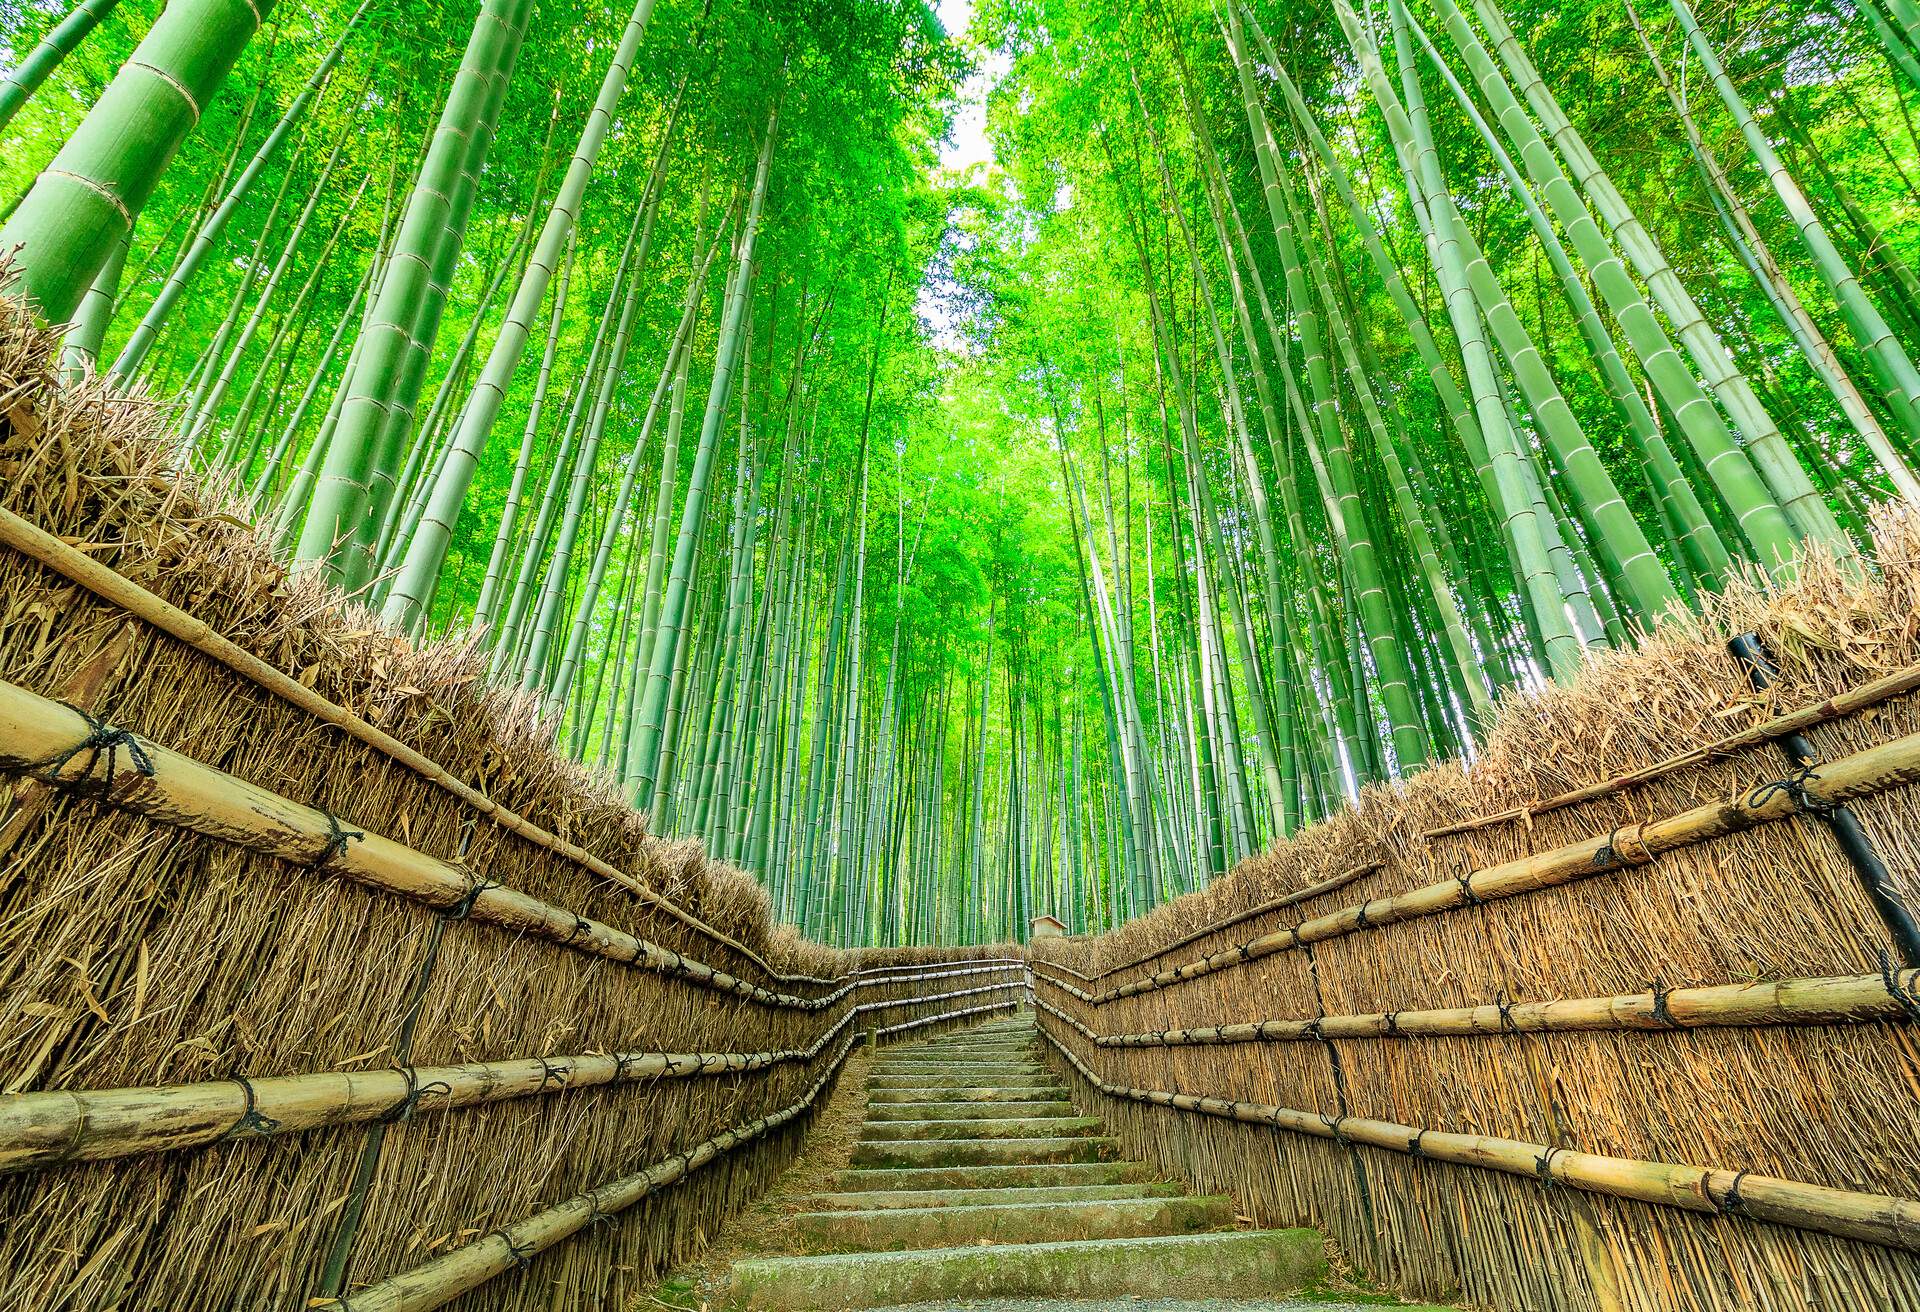 JAPAN_KYOTO_BAMBOO_FOREST